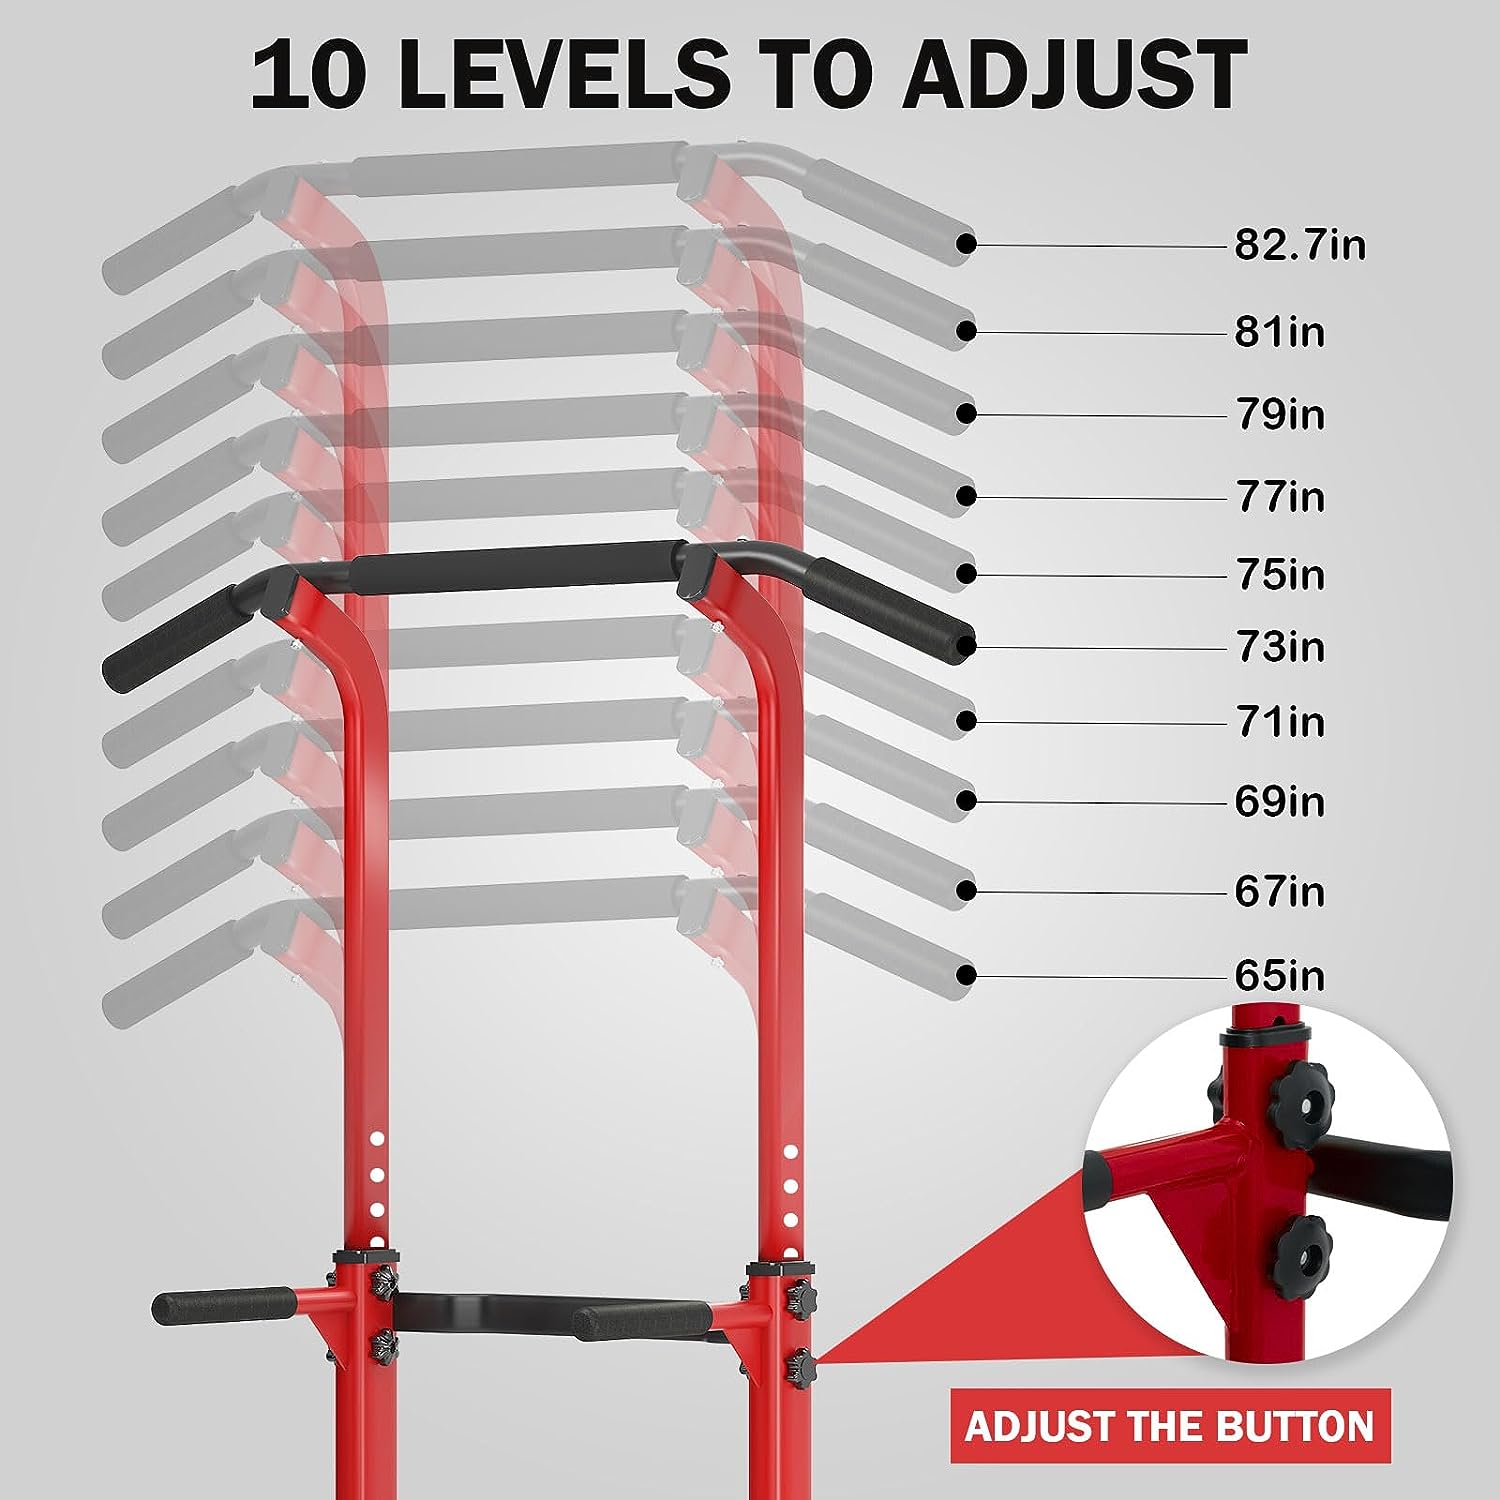 Recommended Pull-Up Bar Height and Other Installation Tips